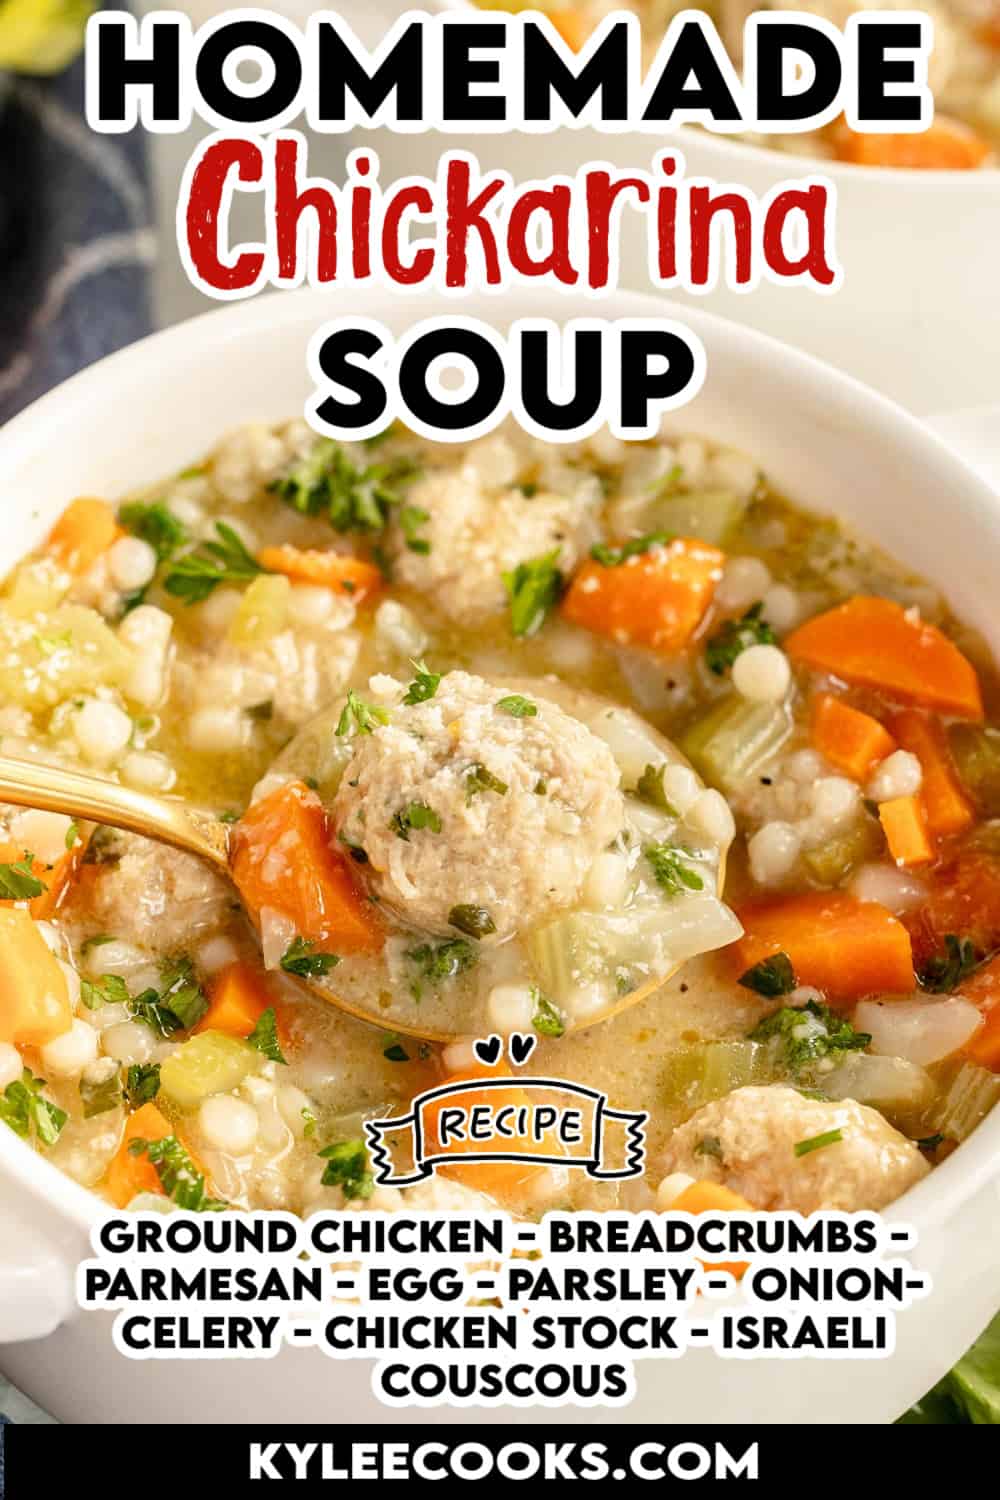 chickarina soup in a bowl with recipe name and ingredients overlaid in text.